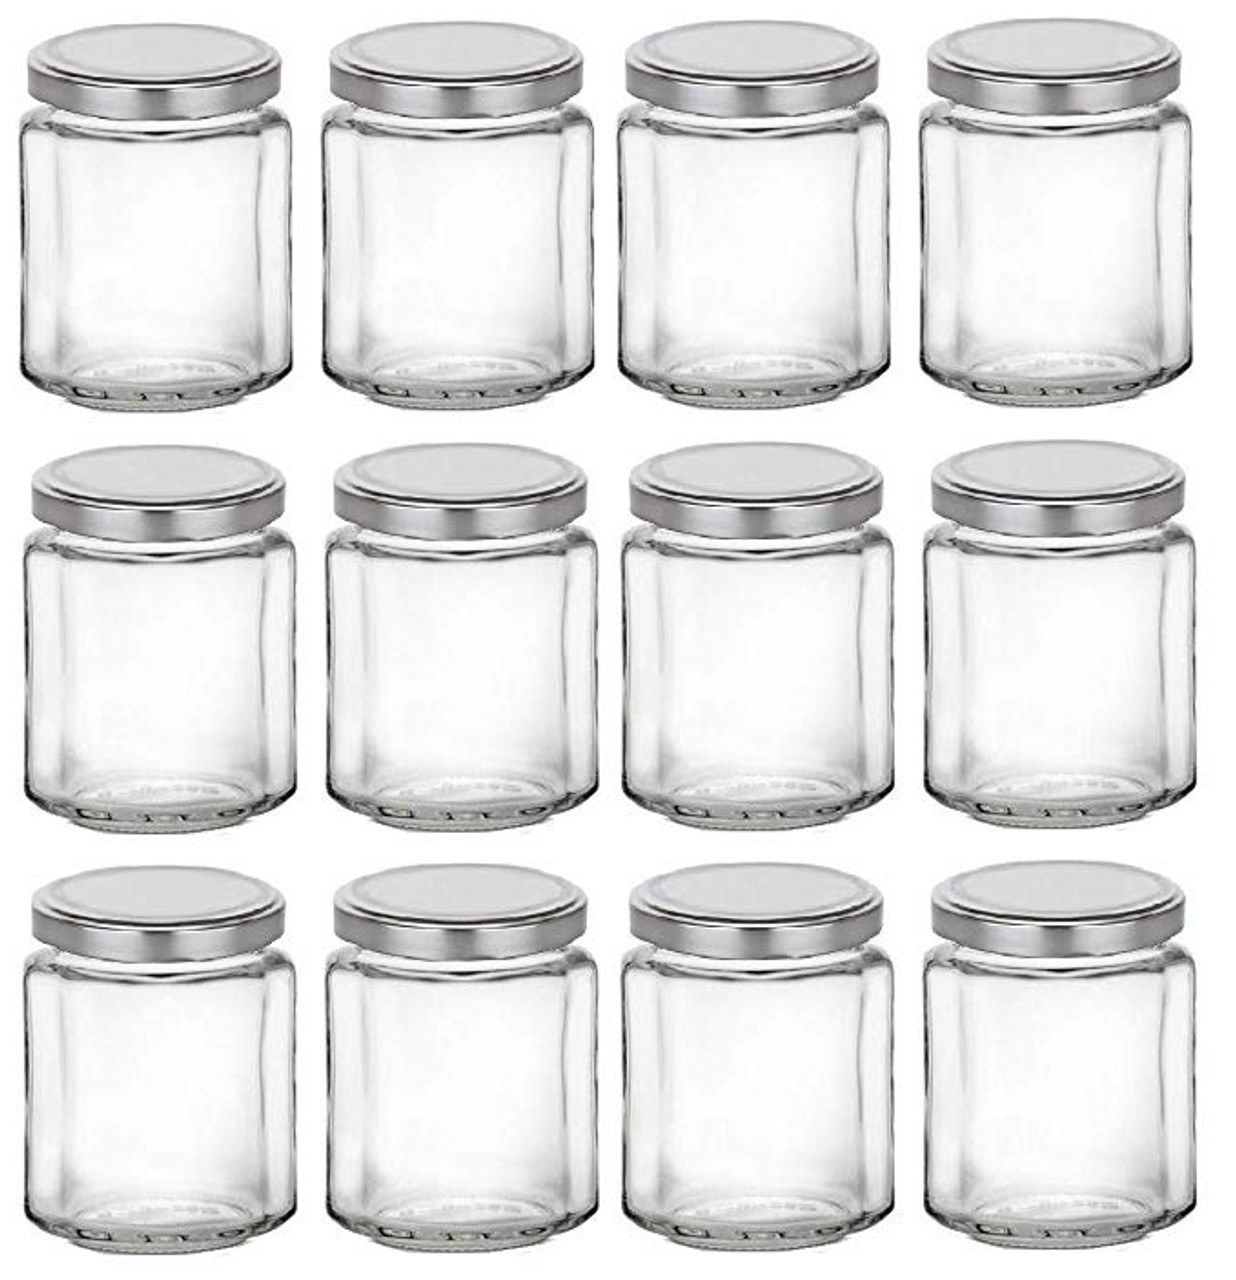 6 oz. Straight Sided Glass Jars With White Lids - Nature's Garden